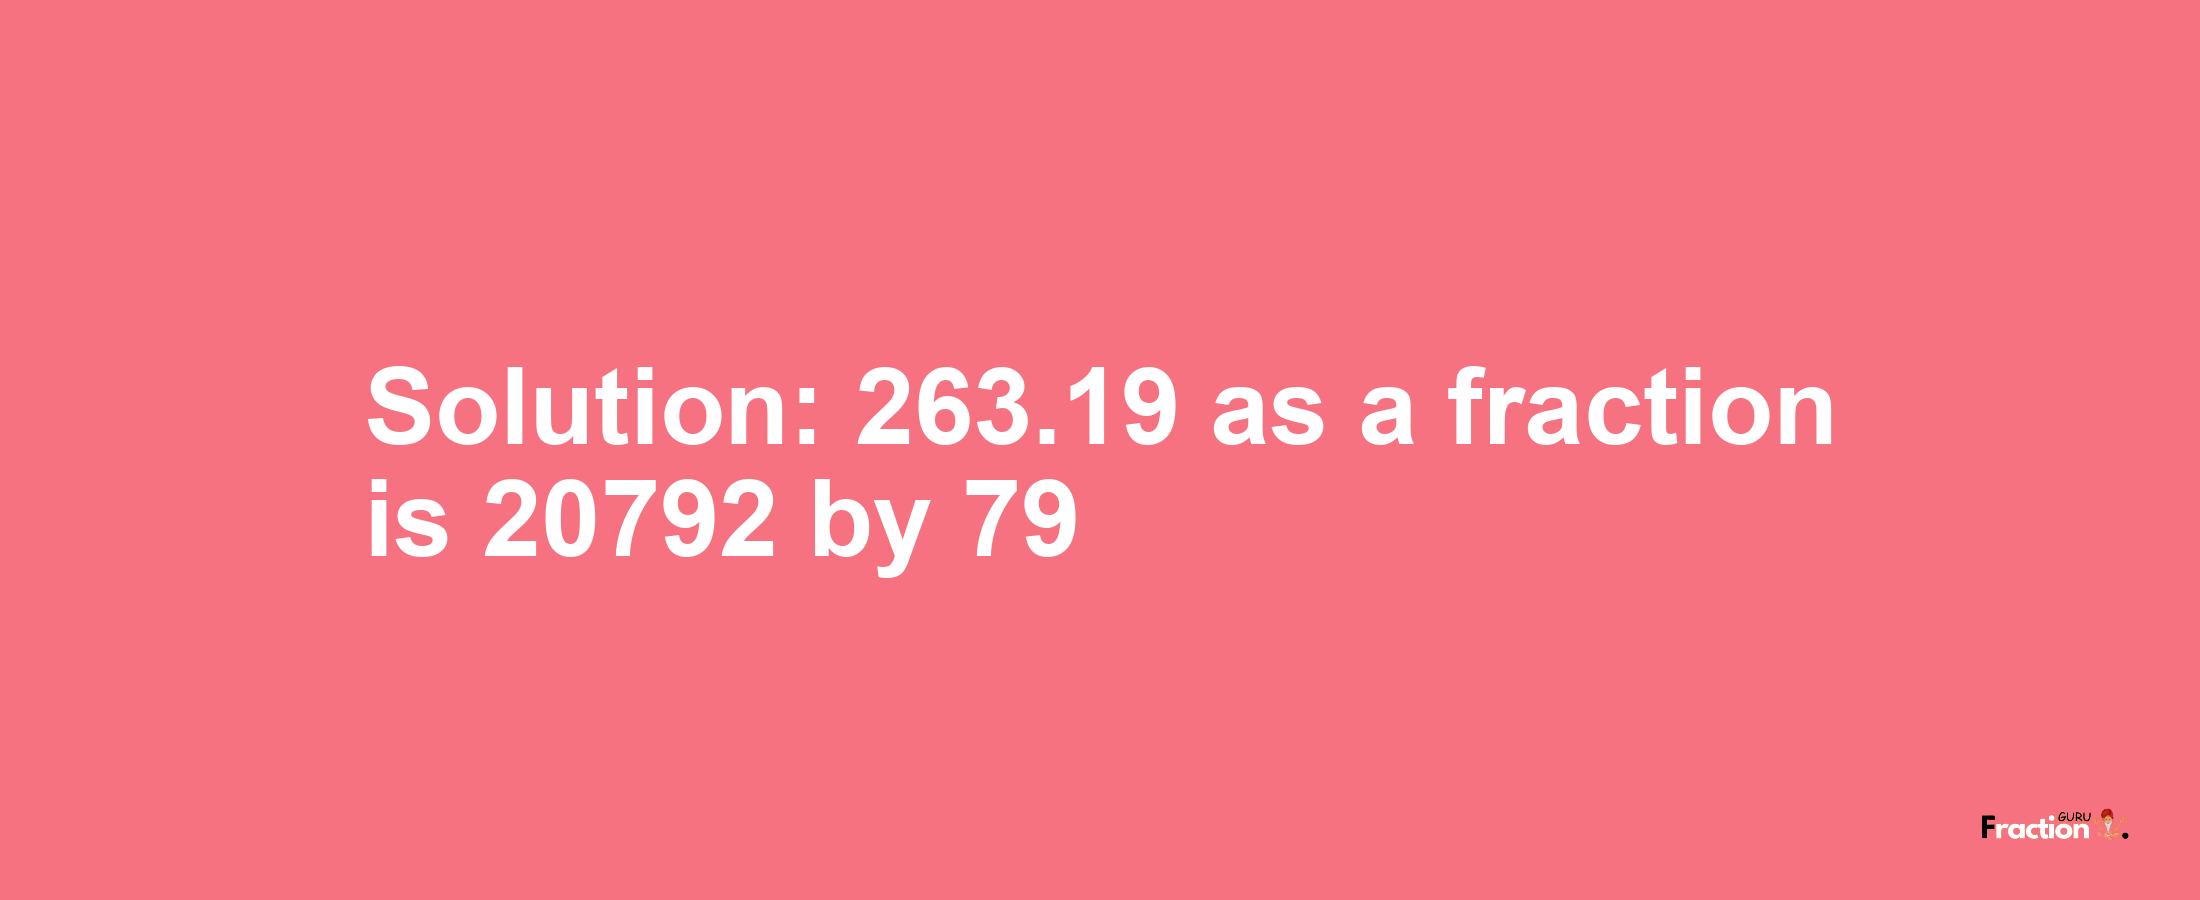 Solution:263.19 as a fraction is 20792/79